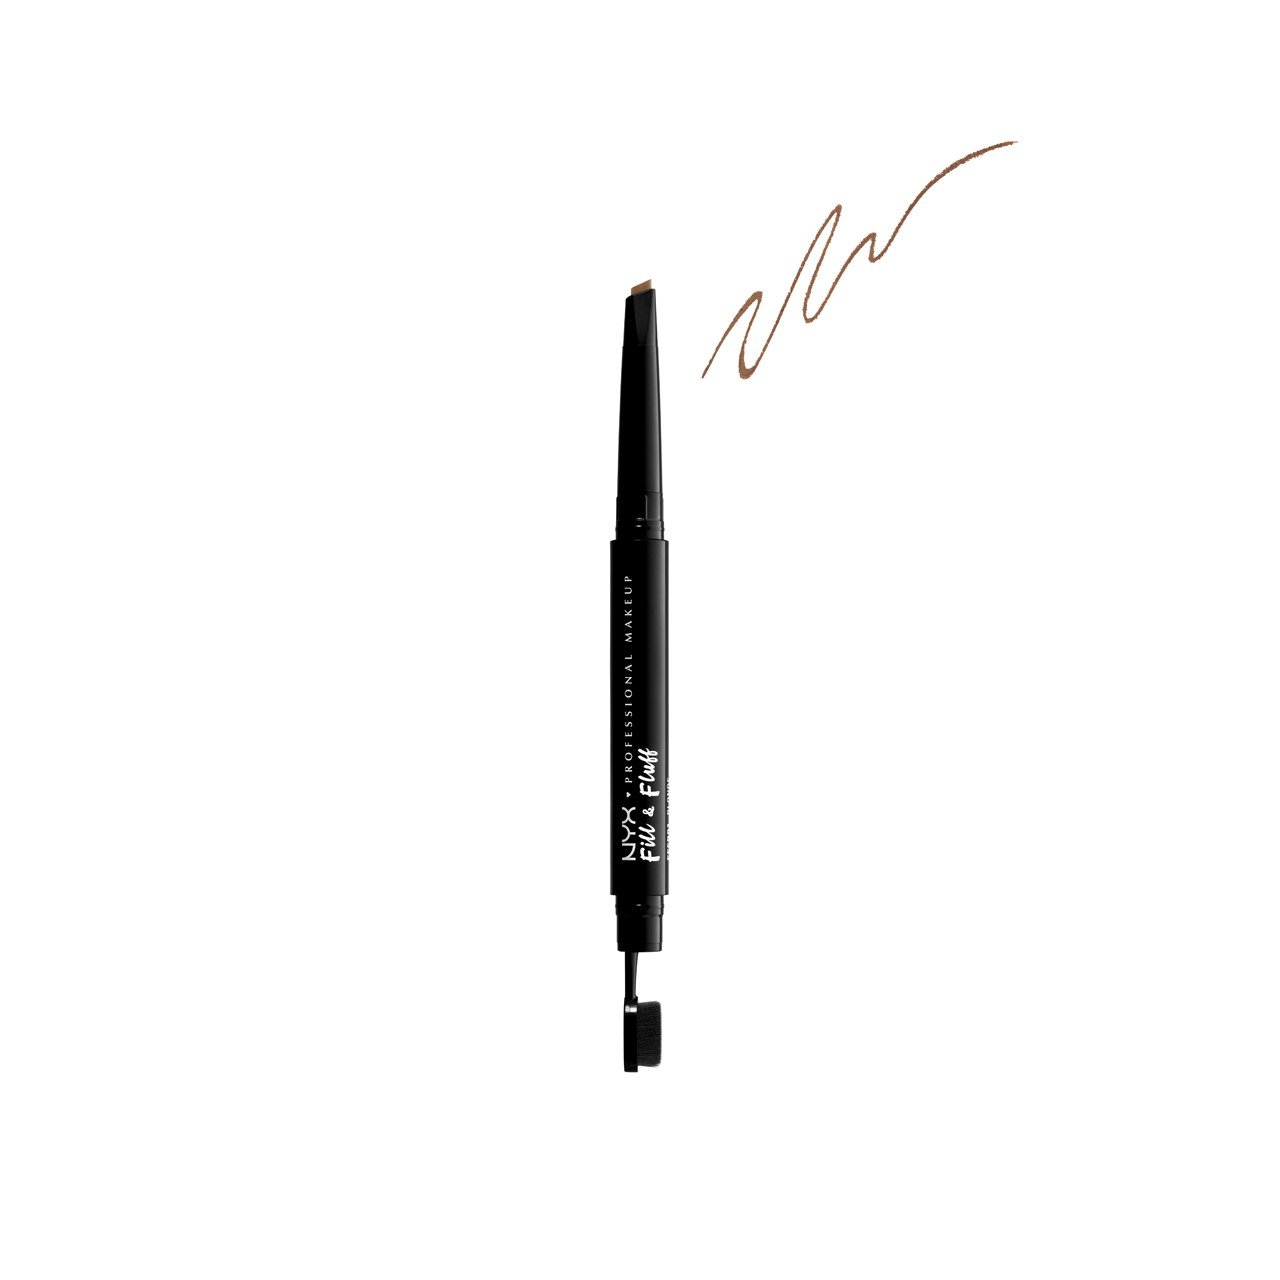 NYX Pro Makeup Fill & Fluff Eyebrow Pomade Pencil Taupe 0.2g